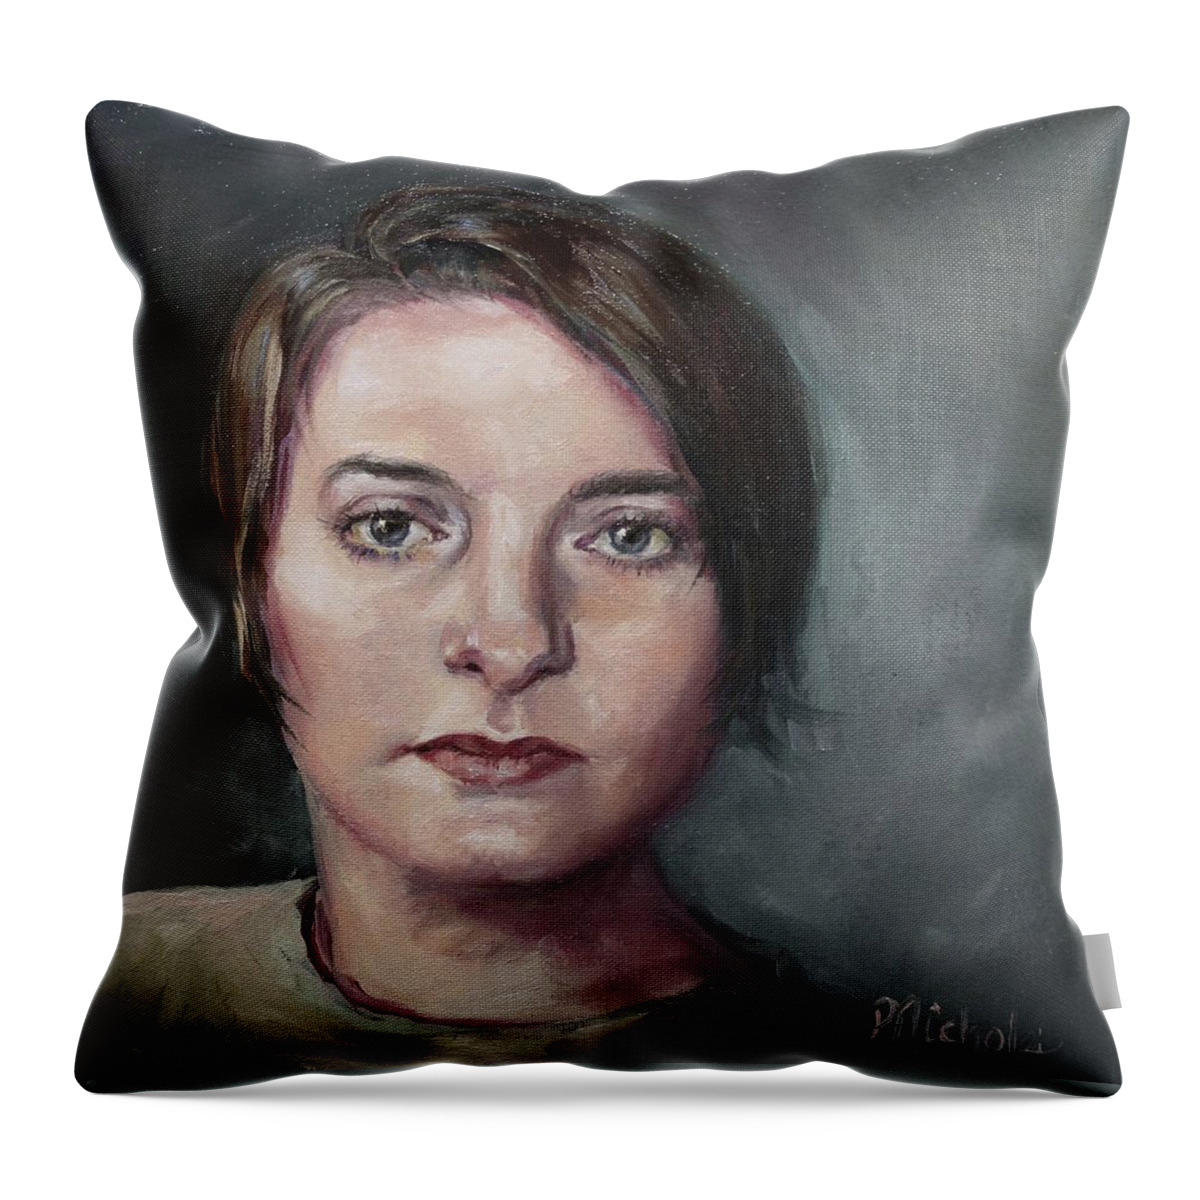 Eyes Throw Pillow featuring the painting Cat's Eyes by Pamela Nichols